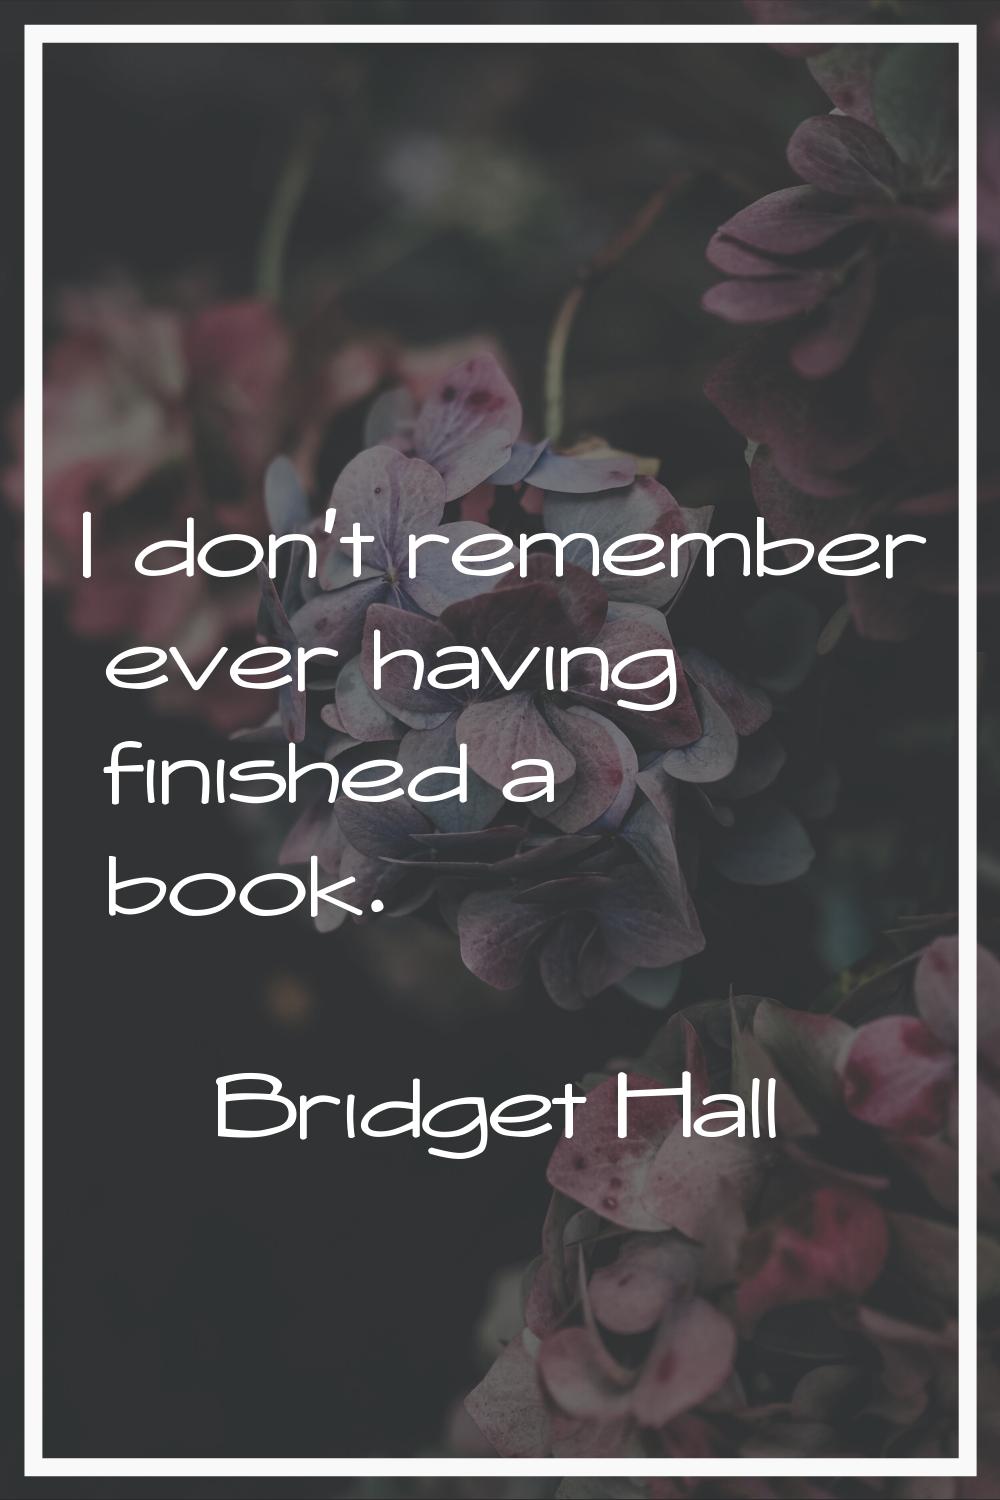 I don't remember ever having finished a book.